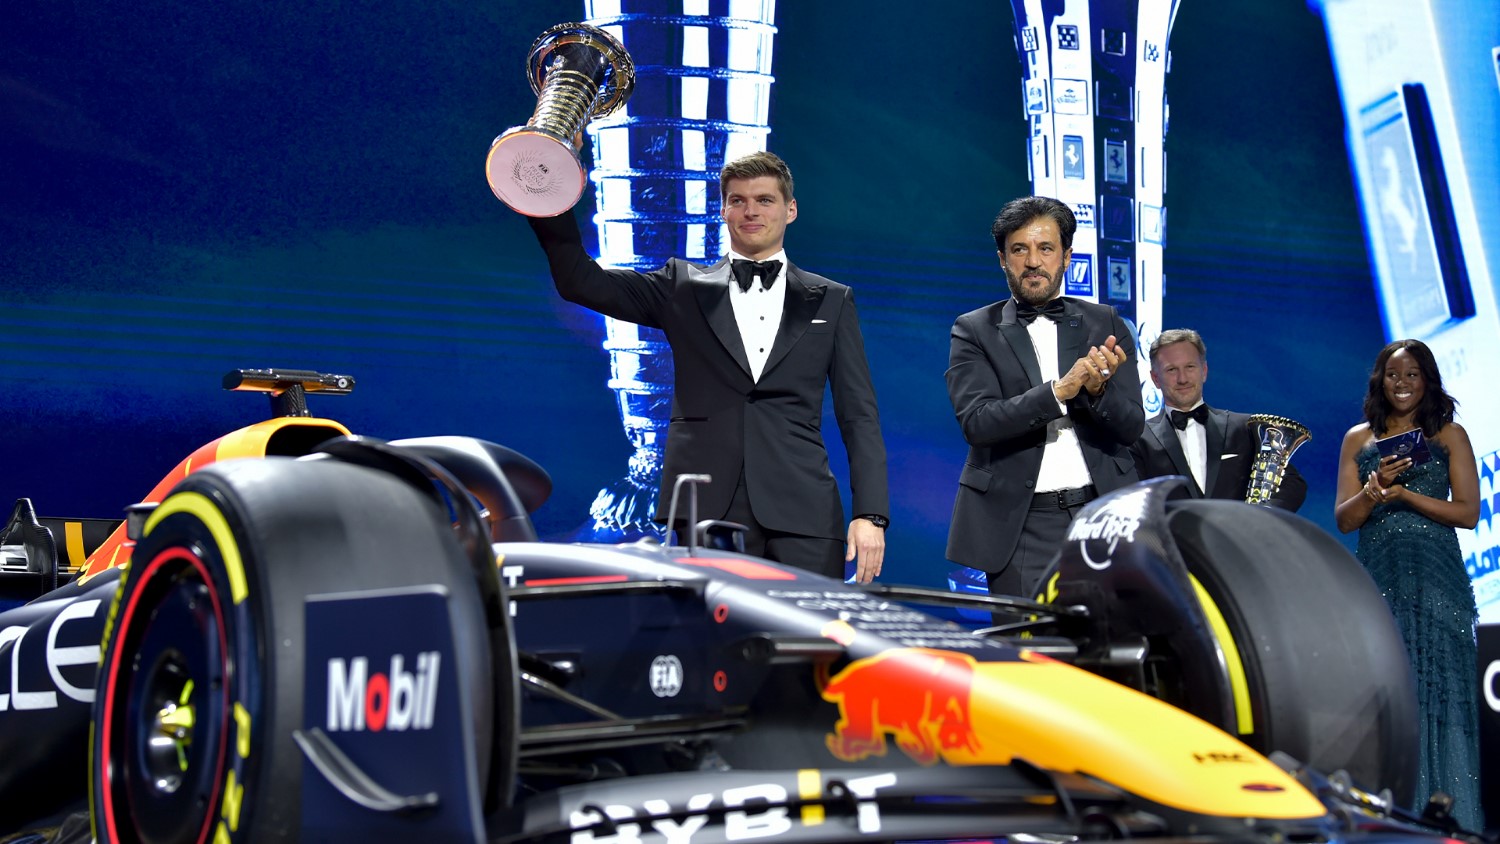 2022 F1 Champion Max Verstappen and FIA President Mohammed Ben Sulayem